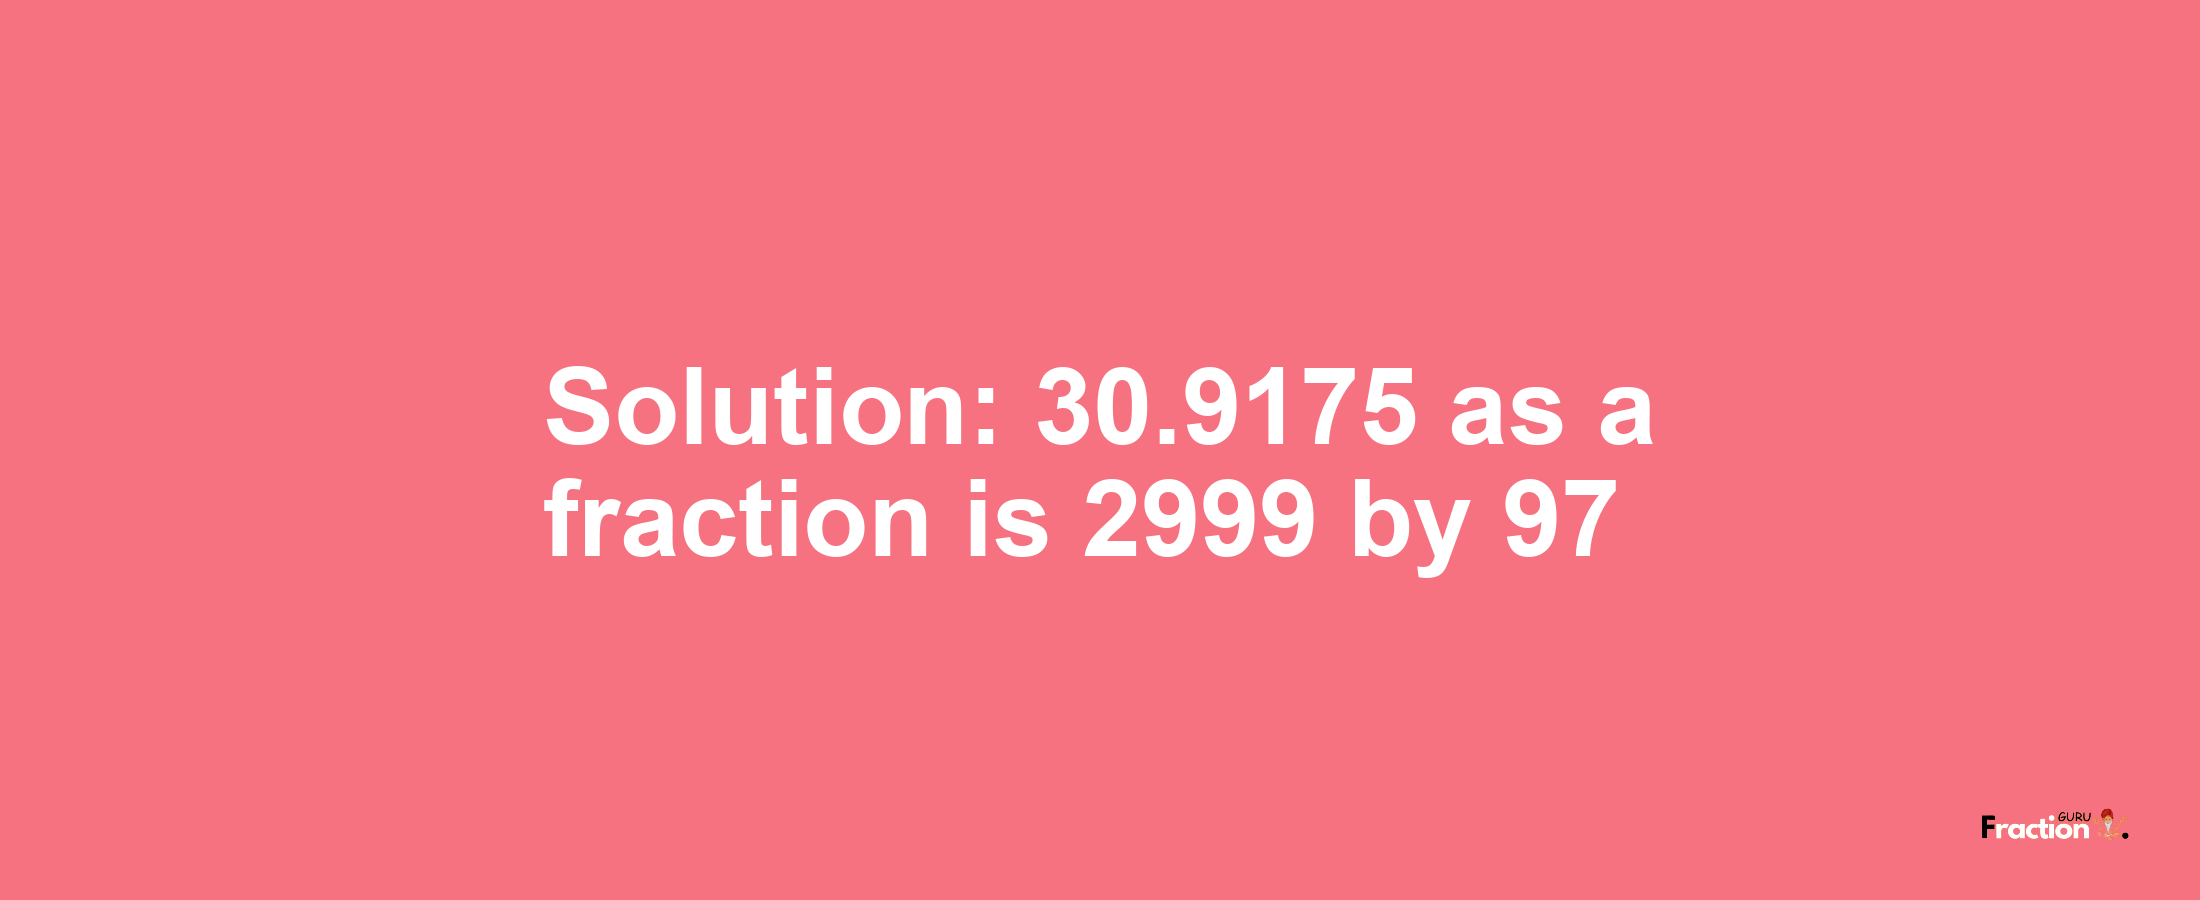 Solution:30.9175 as a fraction is 2999/97